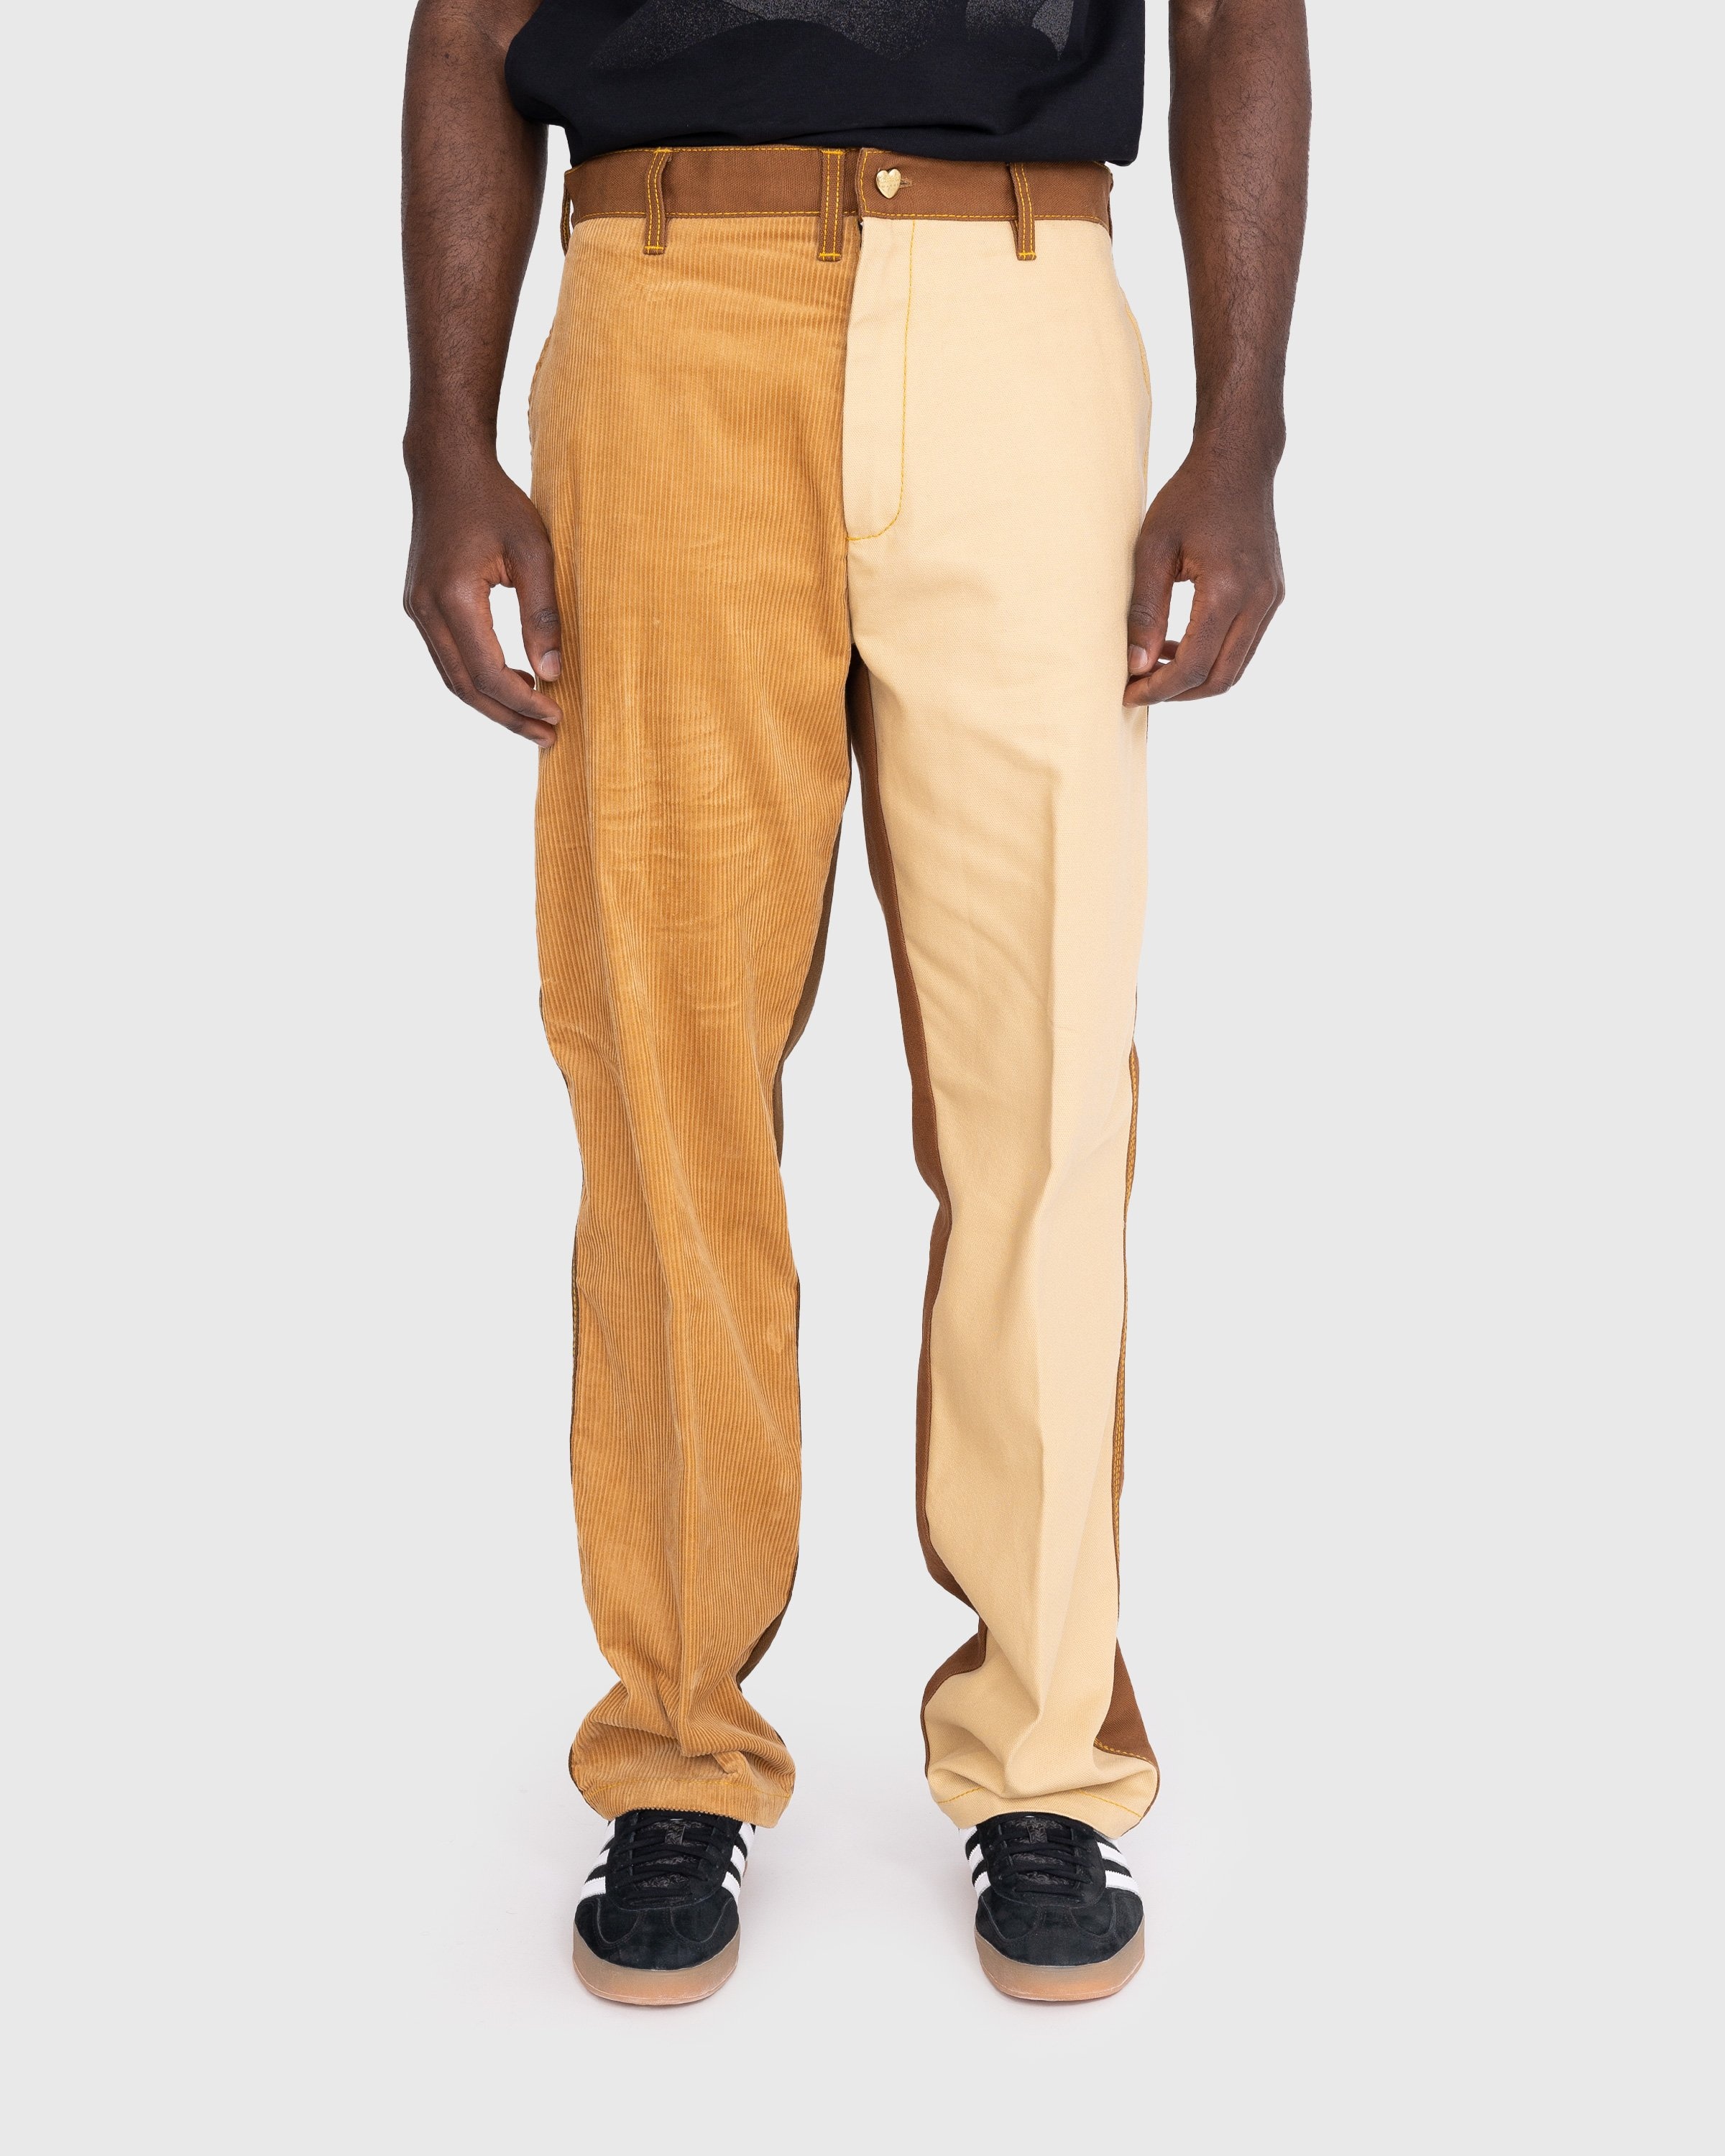 Marni x Carhartt WIP – Colorblocked Trousers Brown - Trousers - Brown - Image 2